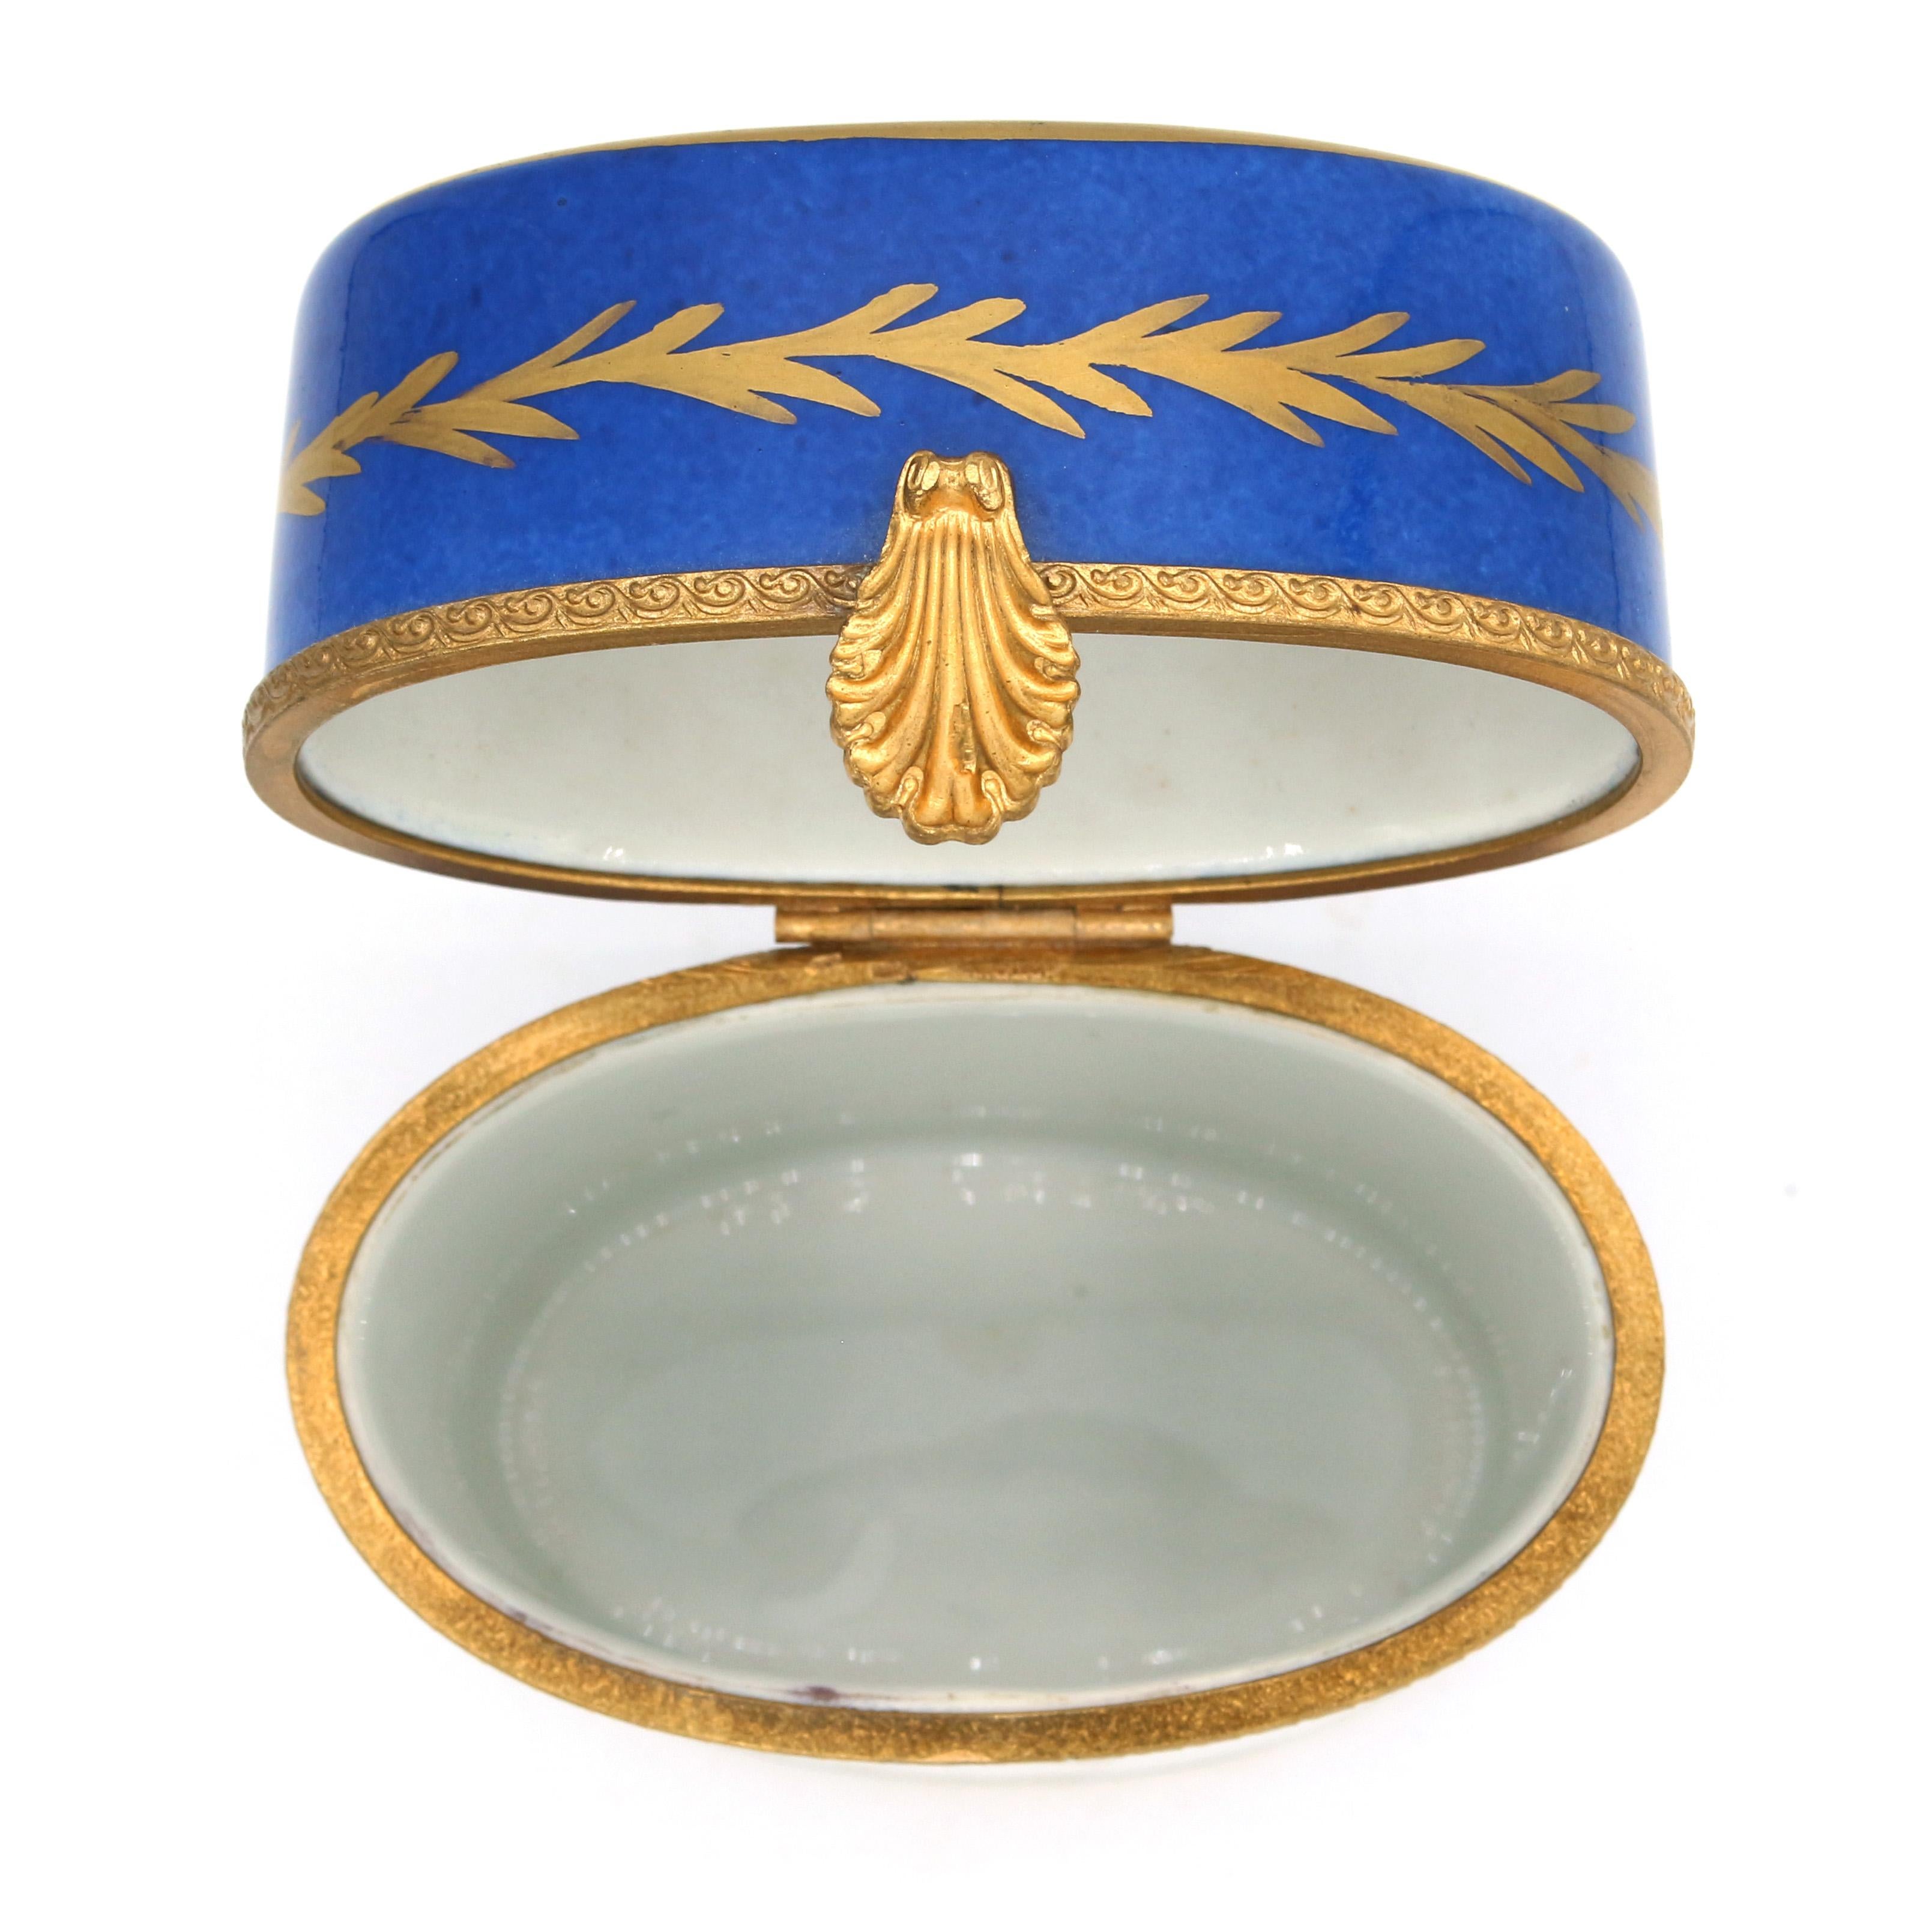 20th Century Vintage French Oval Trinket Box by Limoges